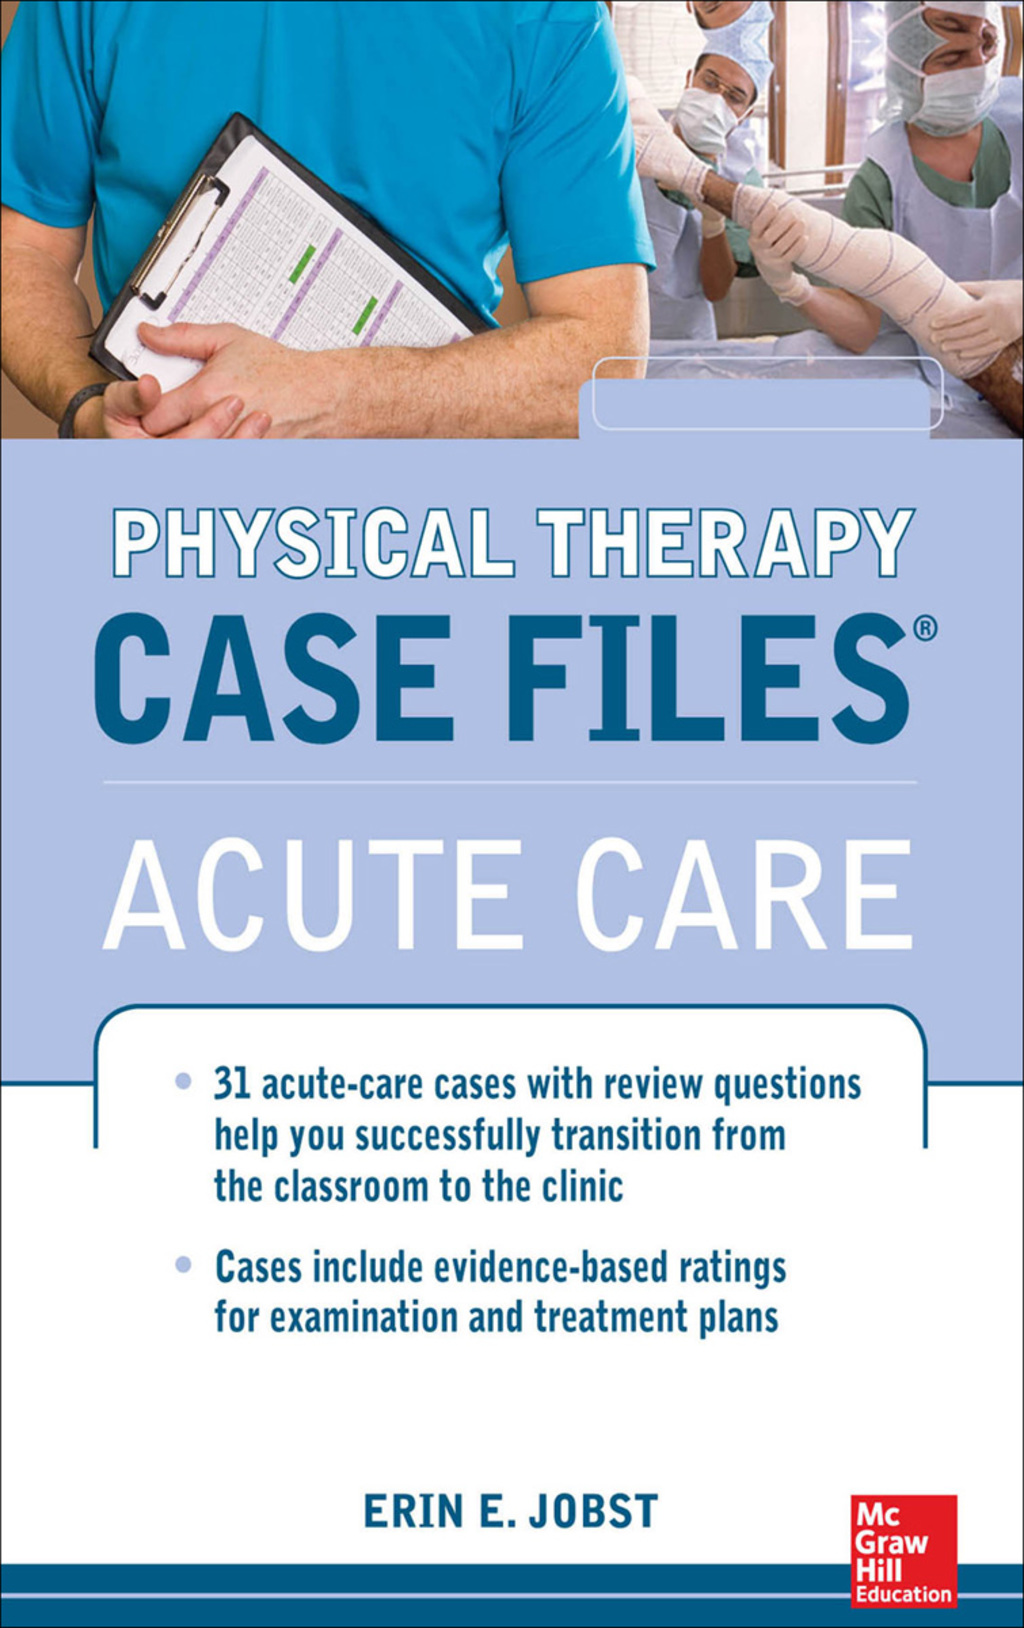 Physical Therapy Case Files: Acute Care (eBook) - Erin E. Jobst